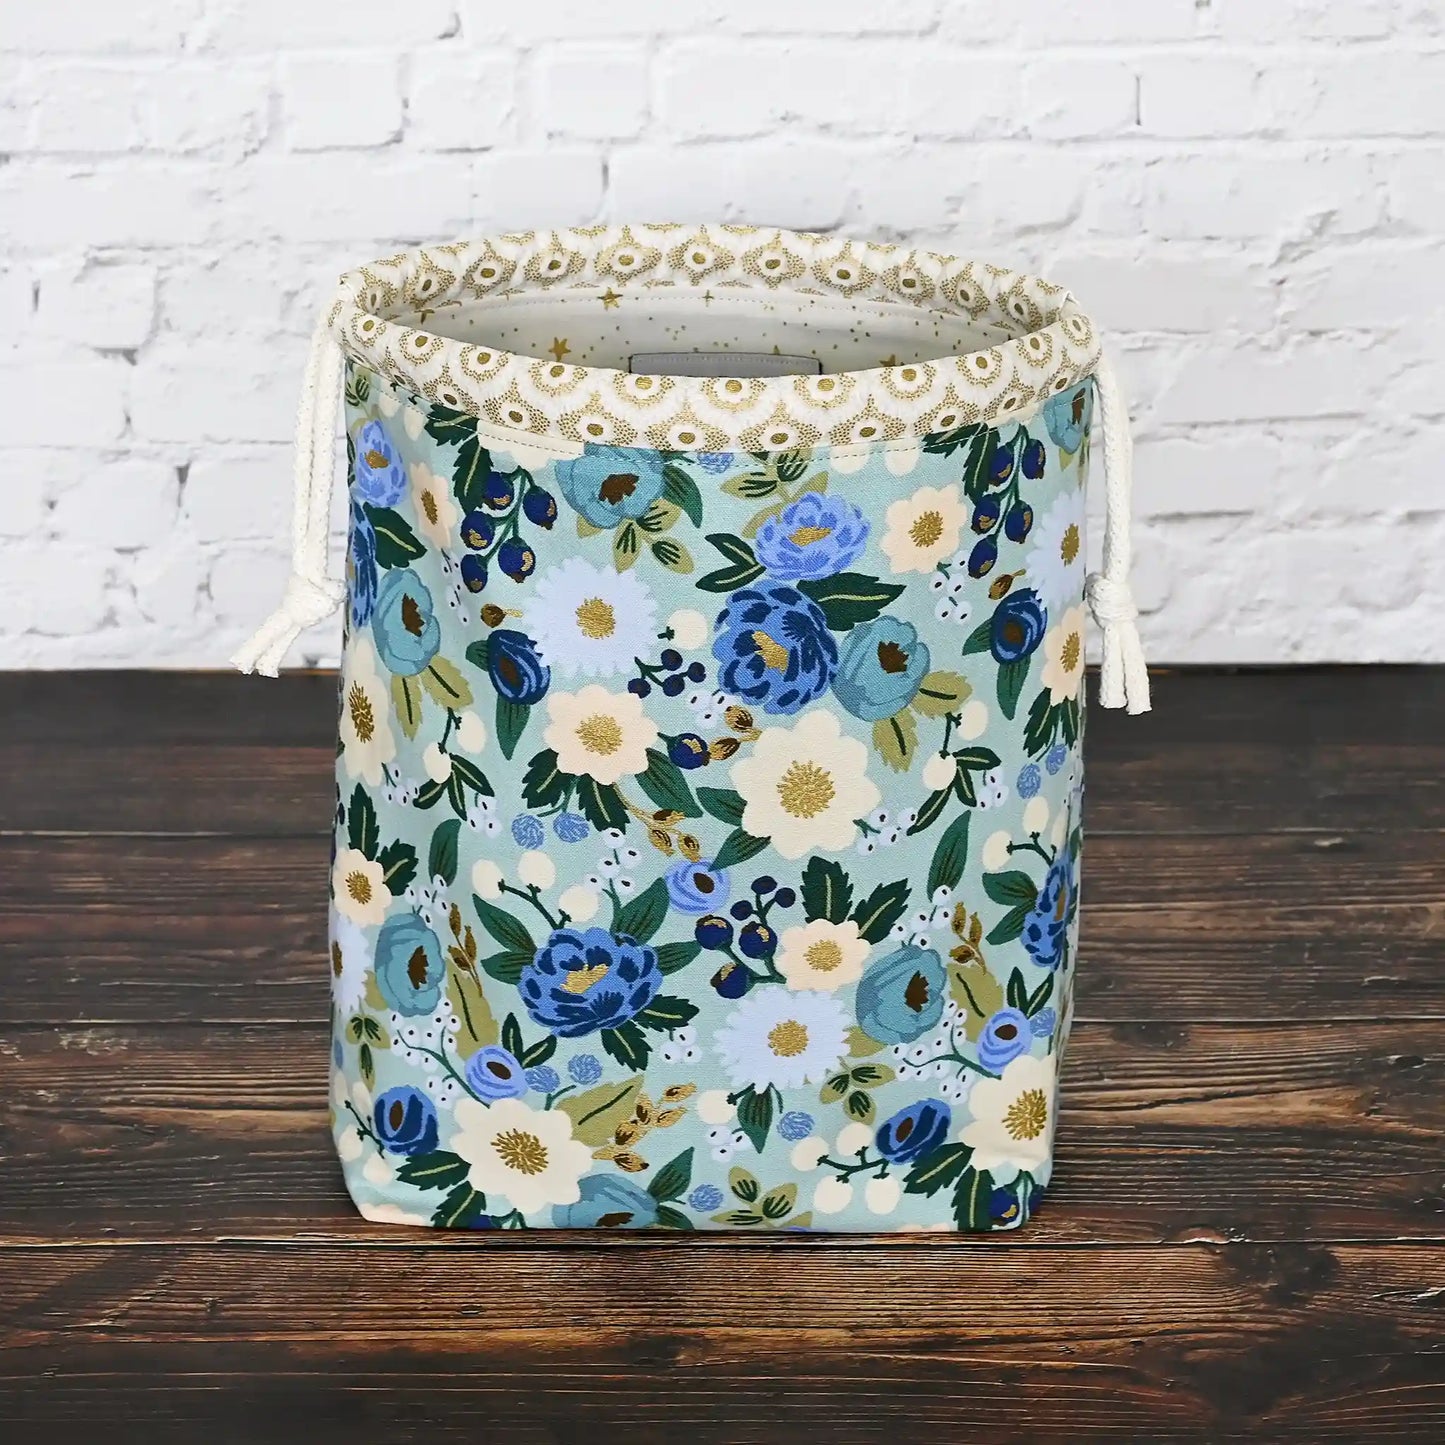 Aqua floral drawstring bag for knitting or crochet.  Made from Rifle Paper Co's Vintage Garden collection.  Made in Nova Scotia, Canada by Yellow Petal Handmade.